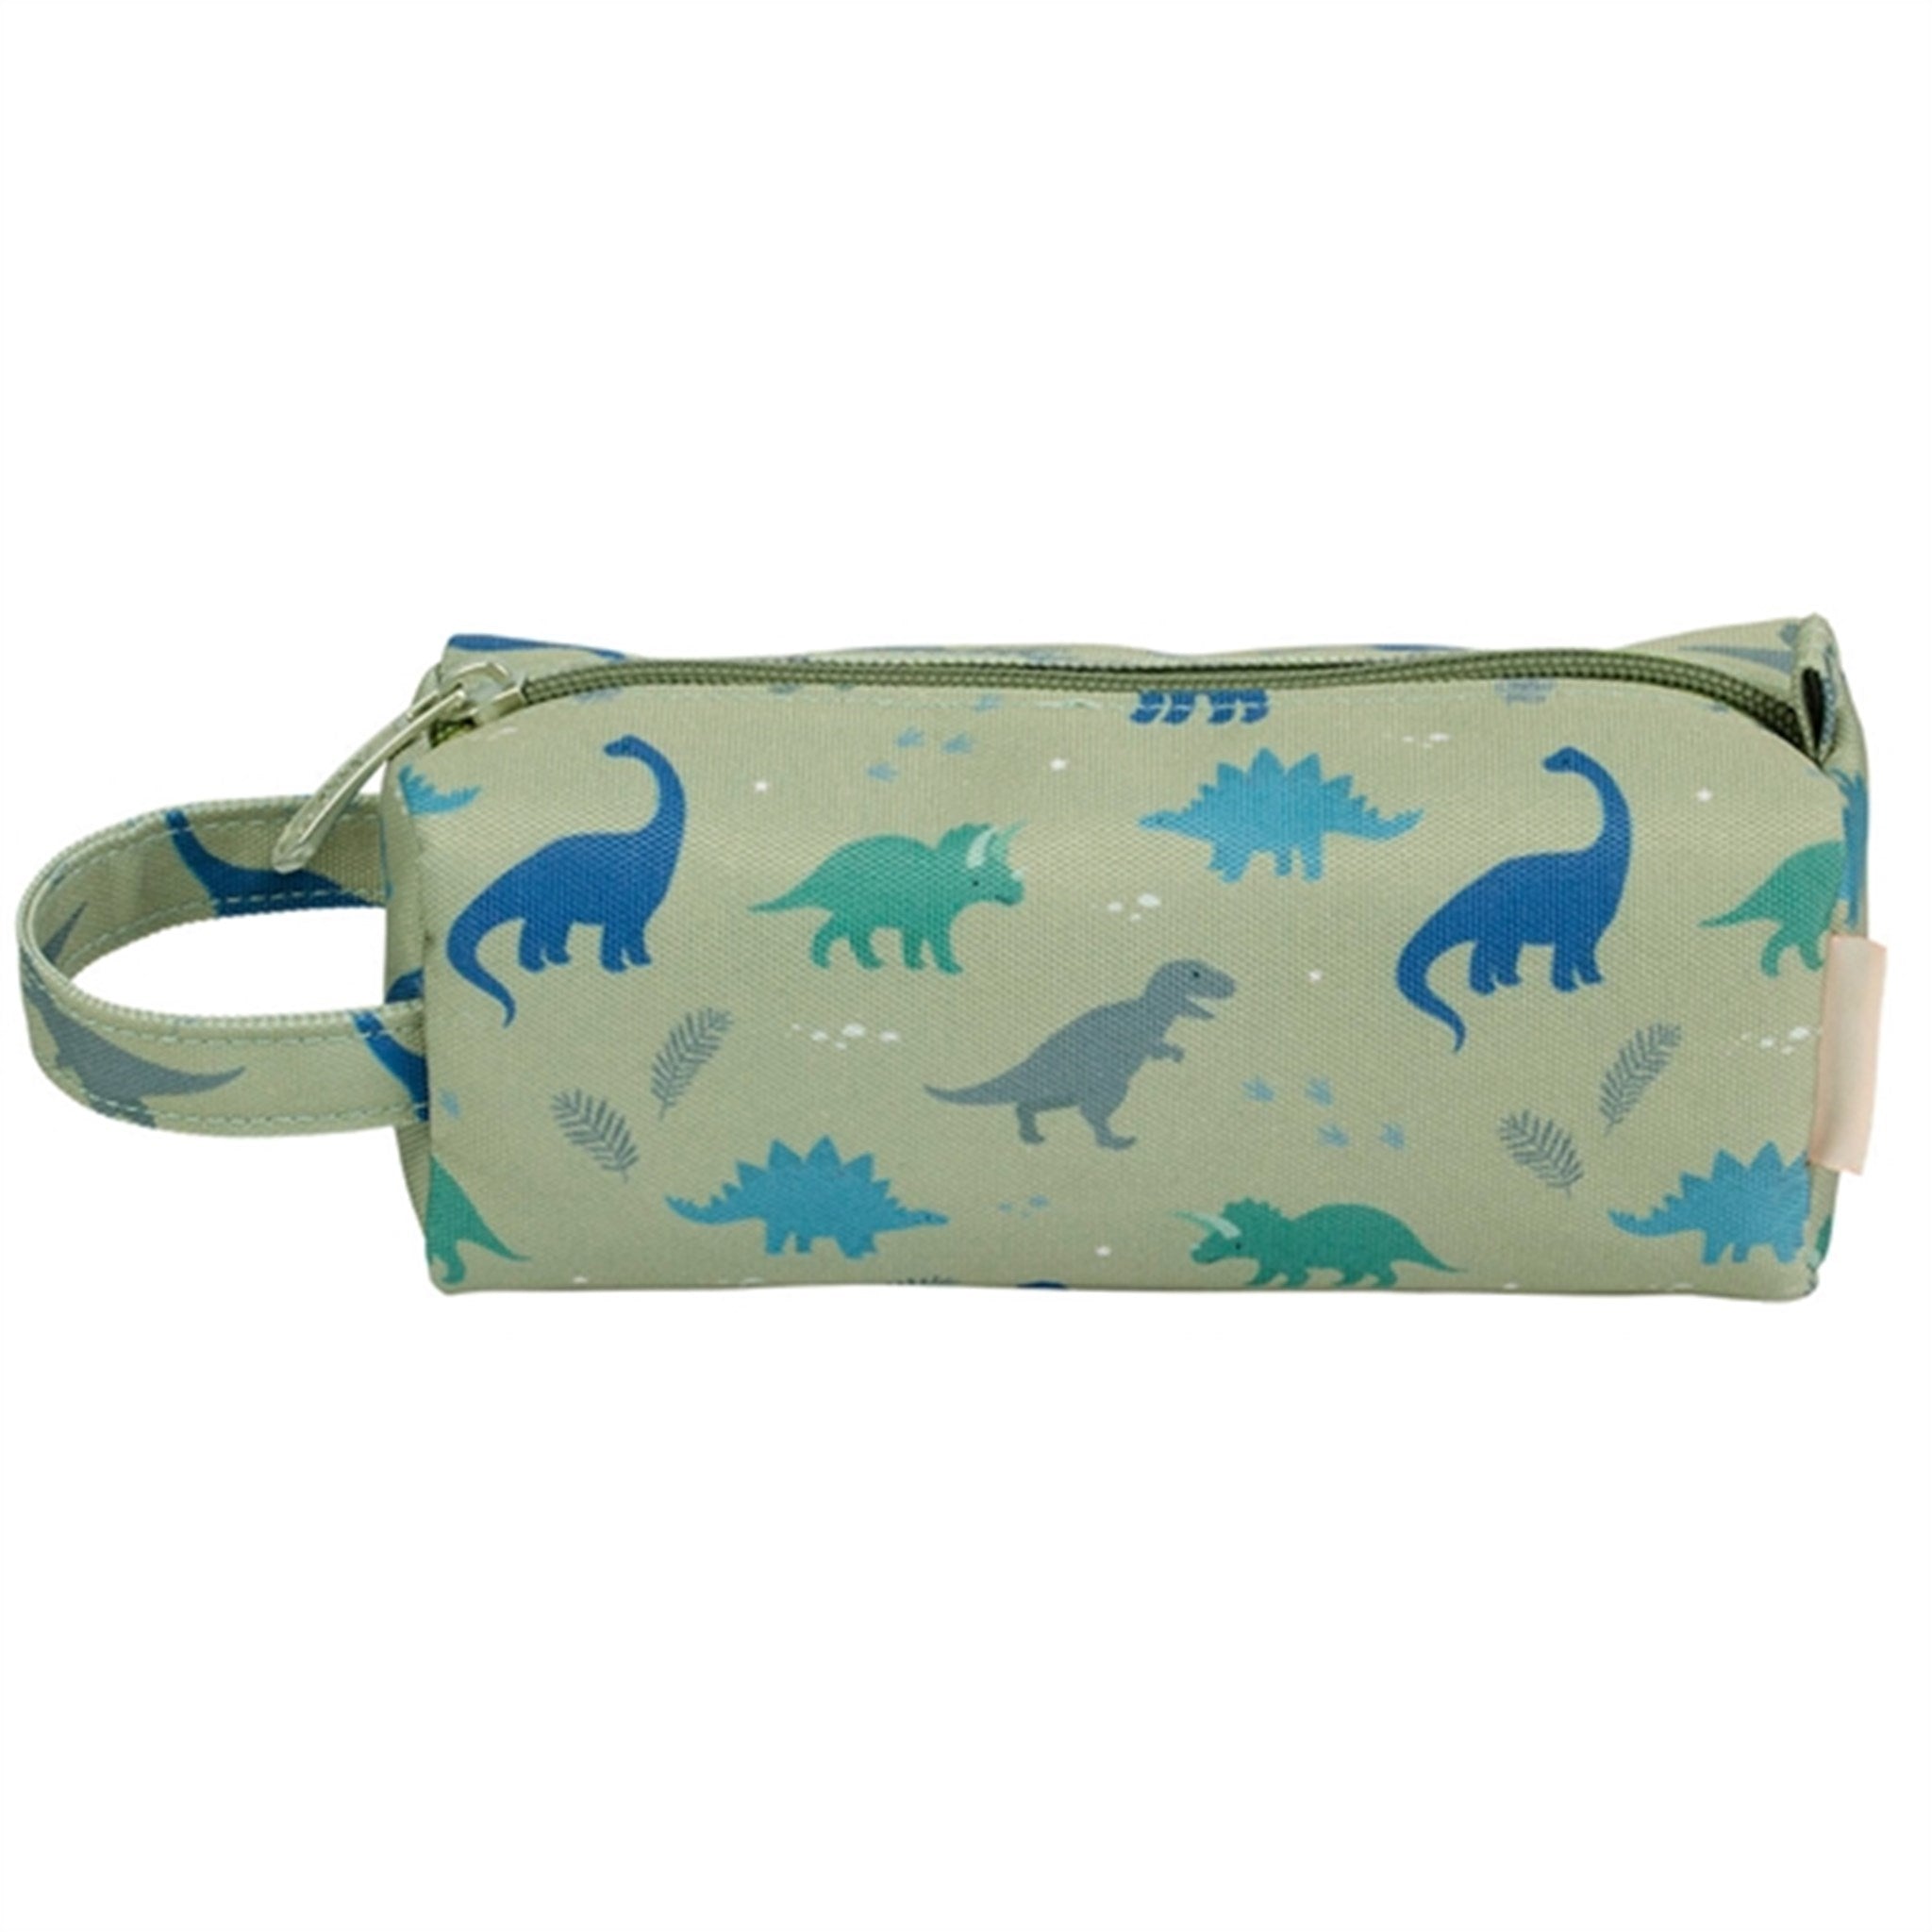 A Little Lovely Company Pencil Case Dinosaurs